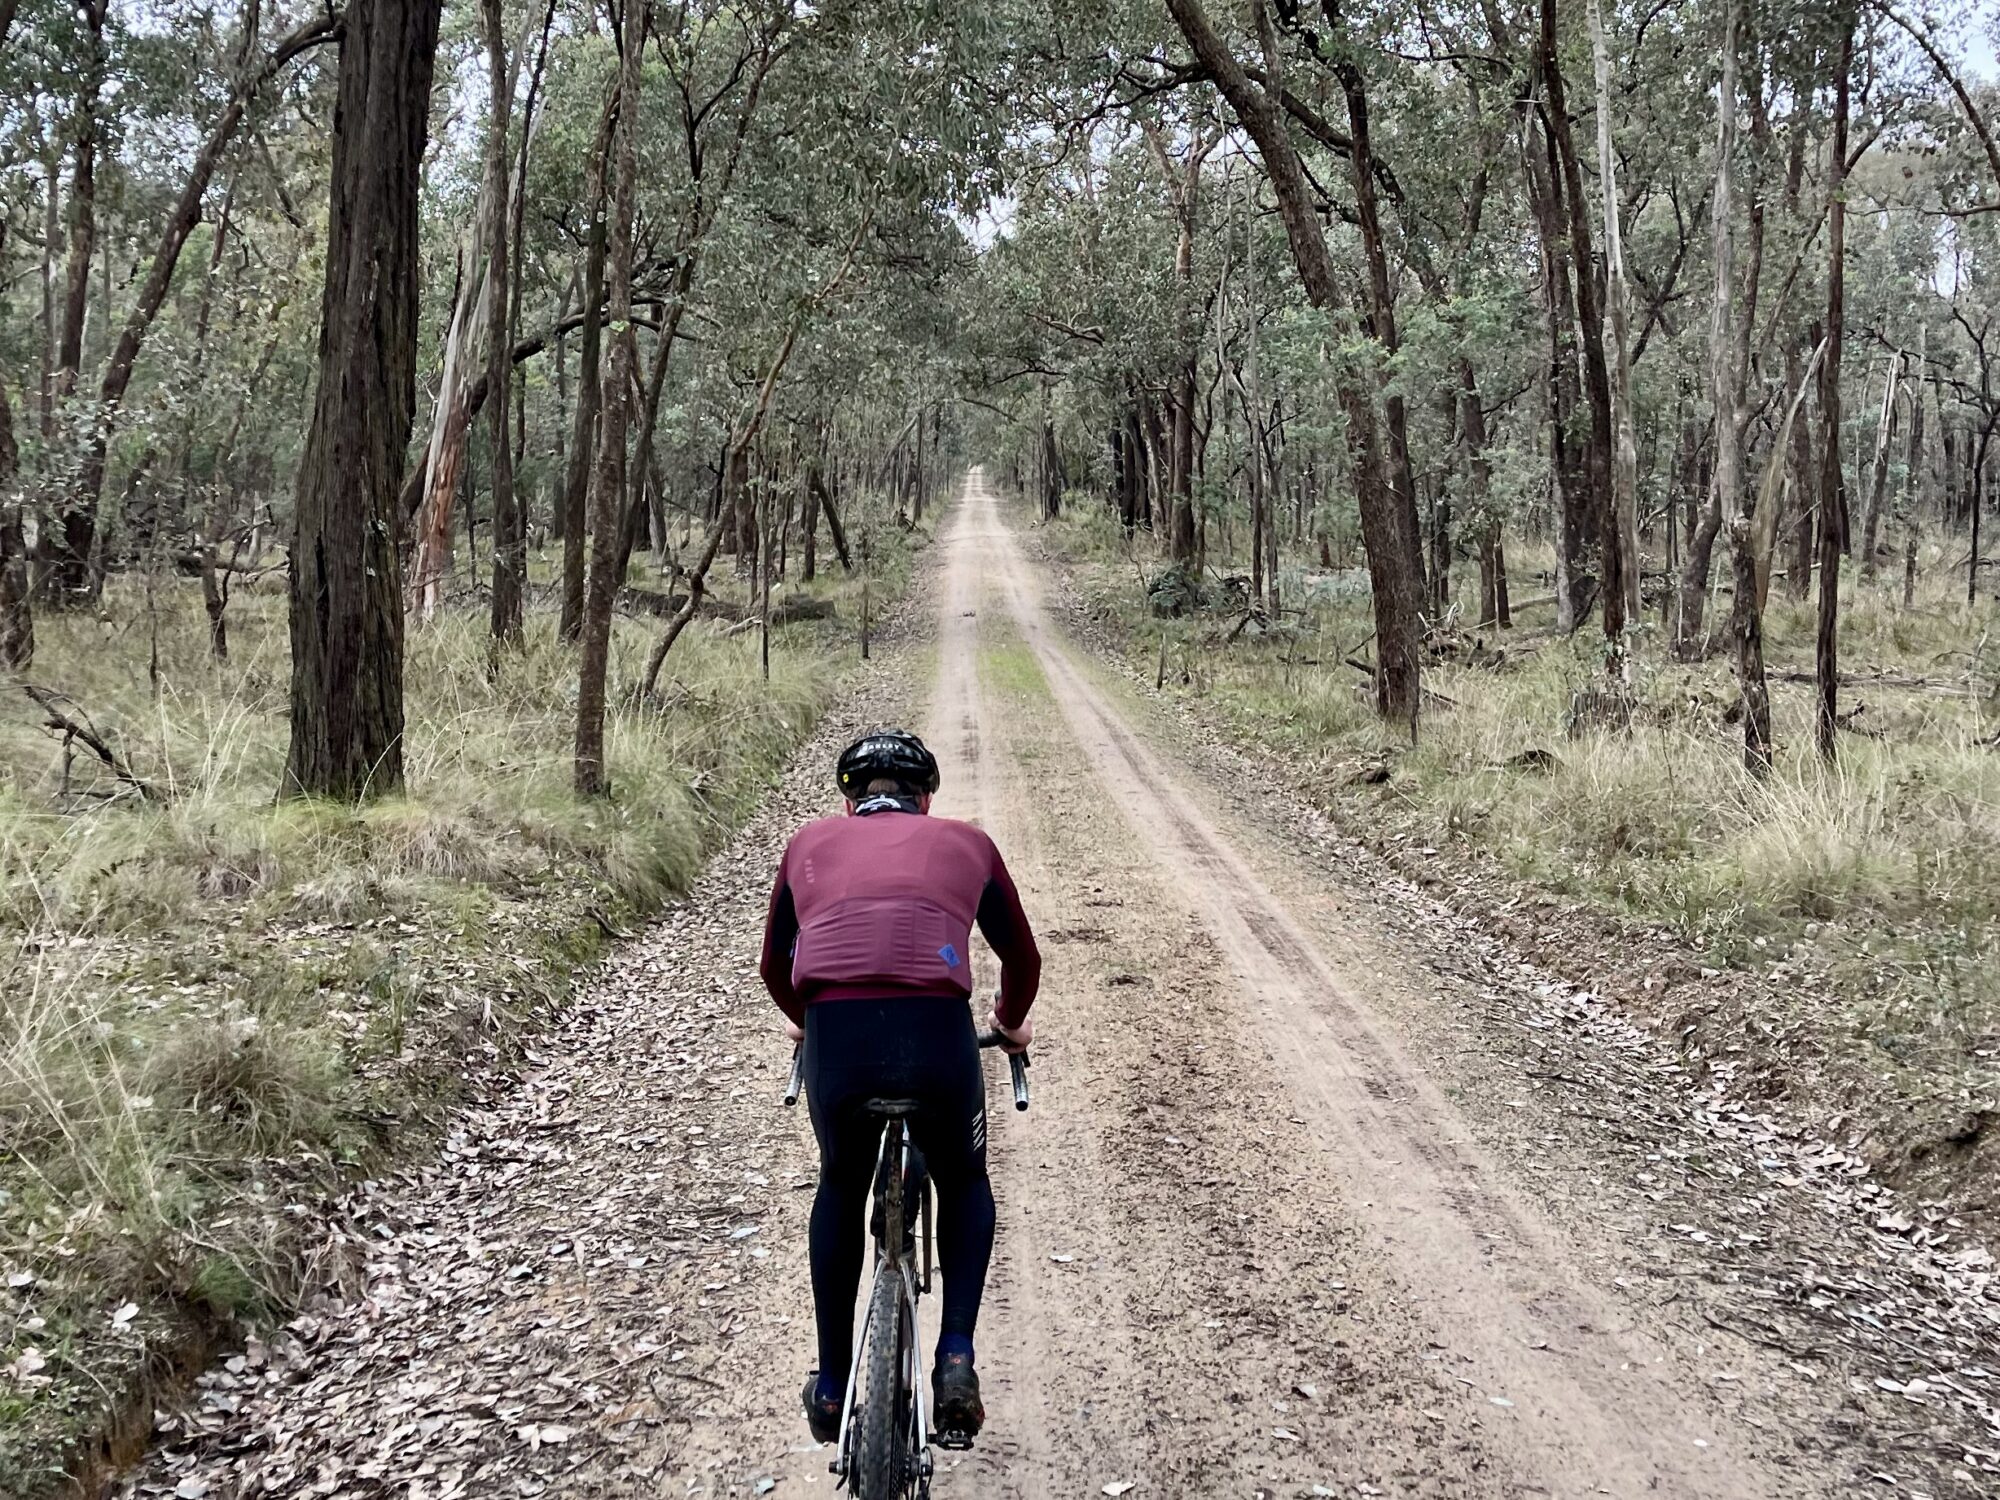  A cyclist riding on a smooth gravel road surrounded by native bush